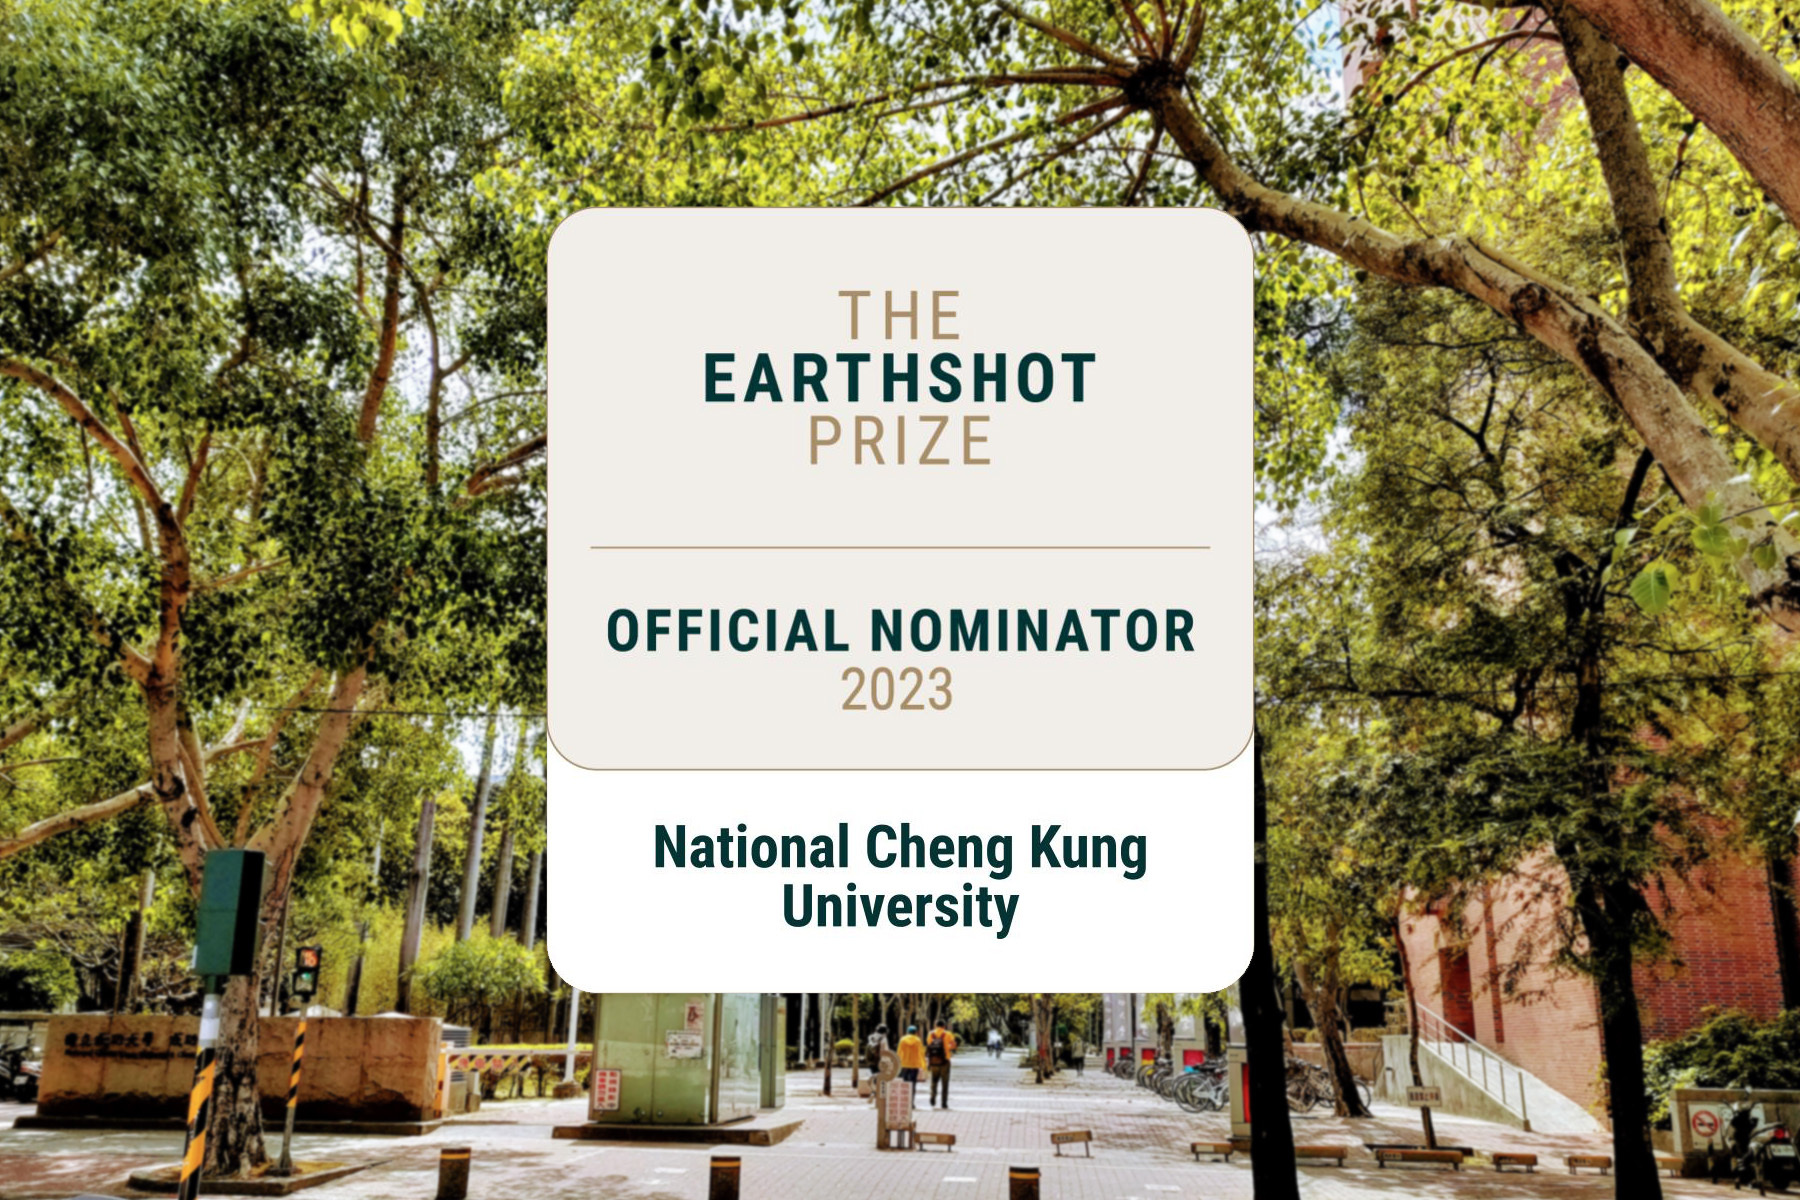 NCKU has been invited to be the official nominator of TEP for the third time